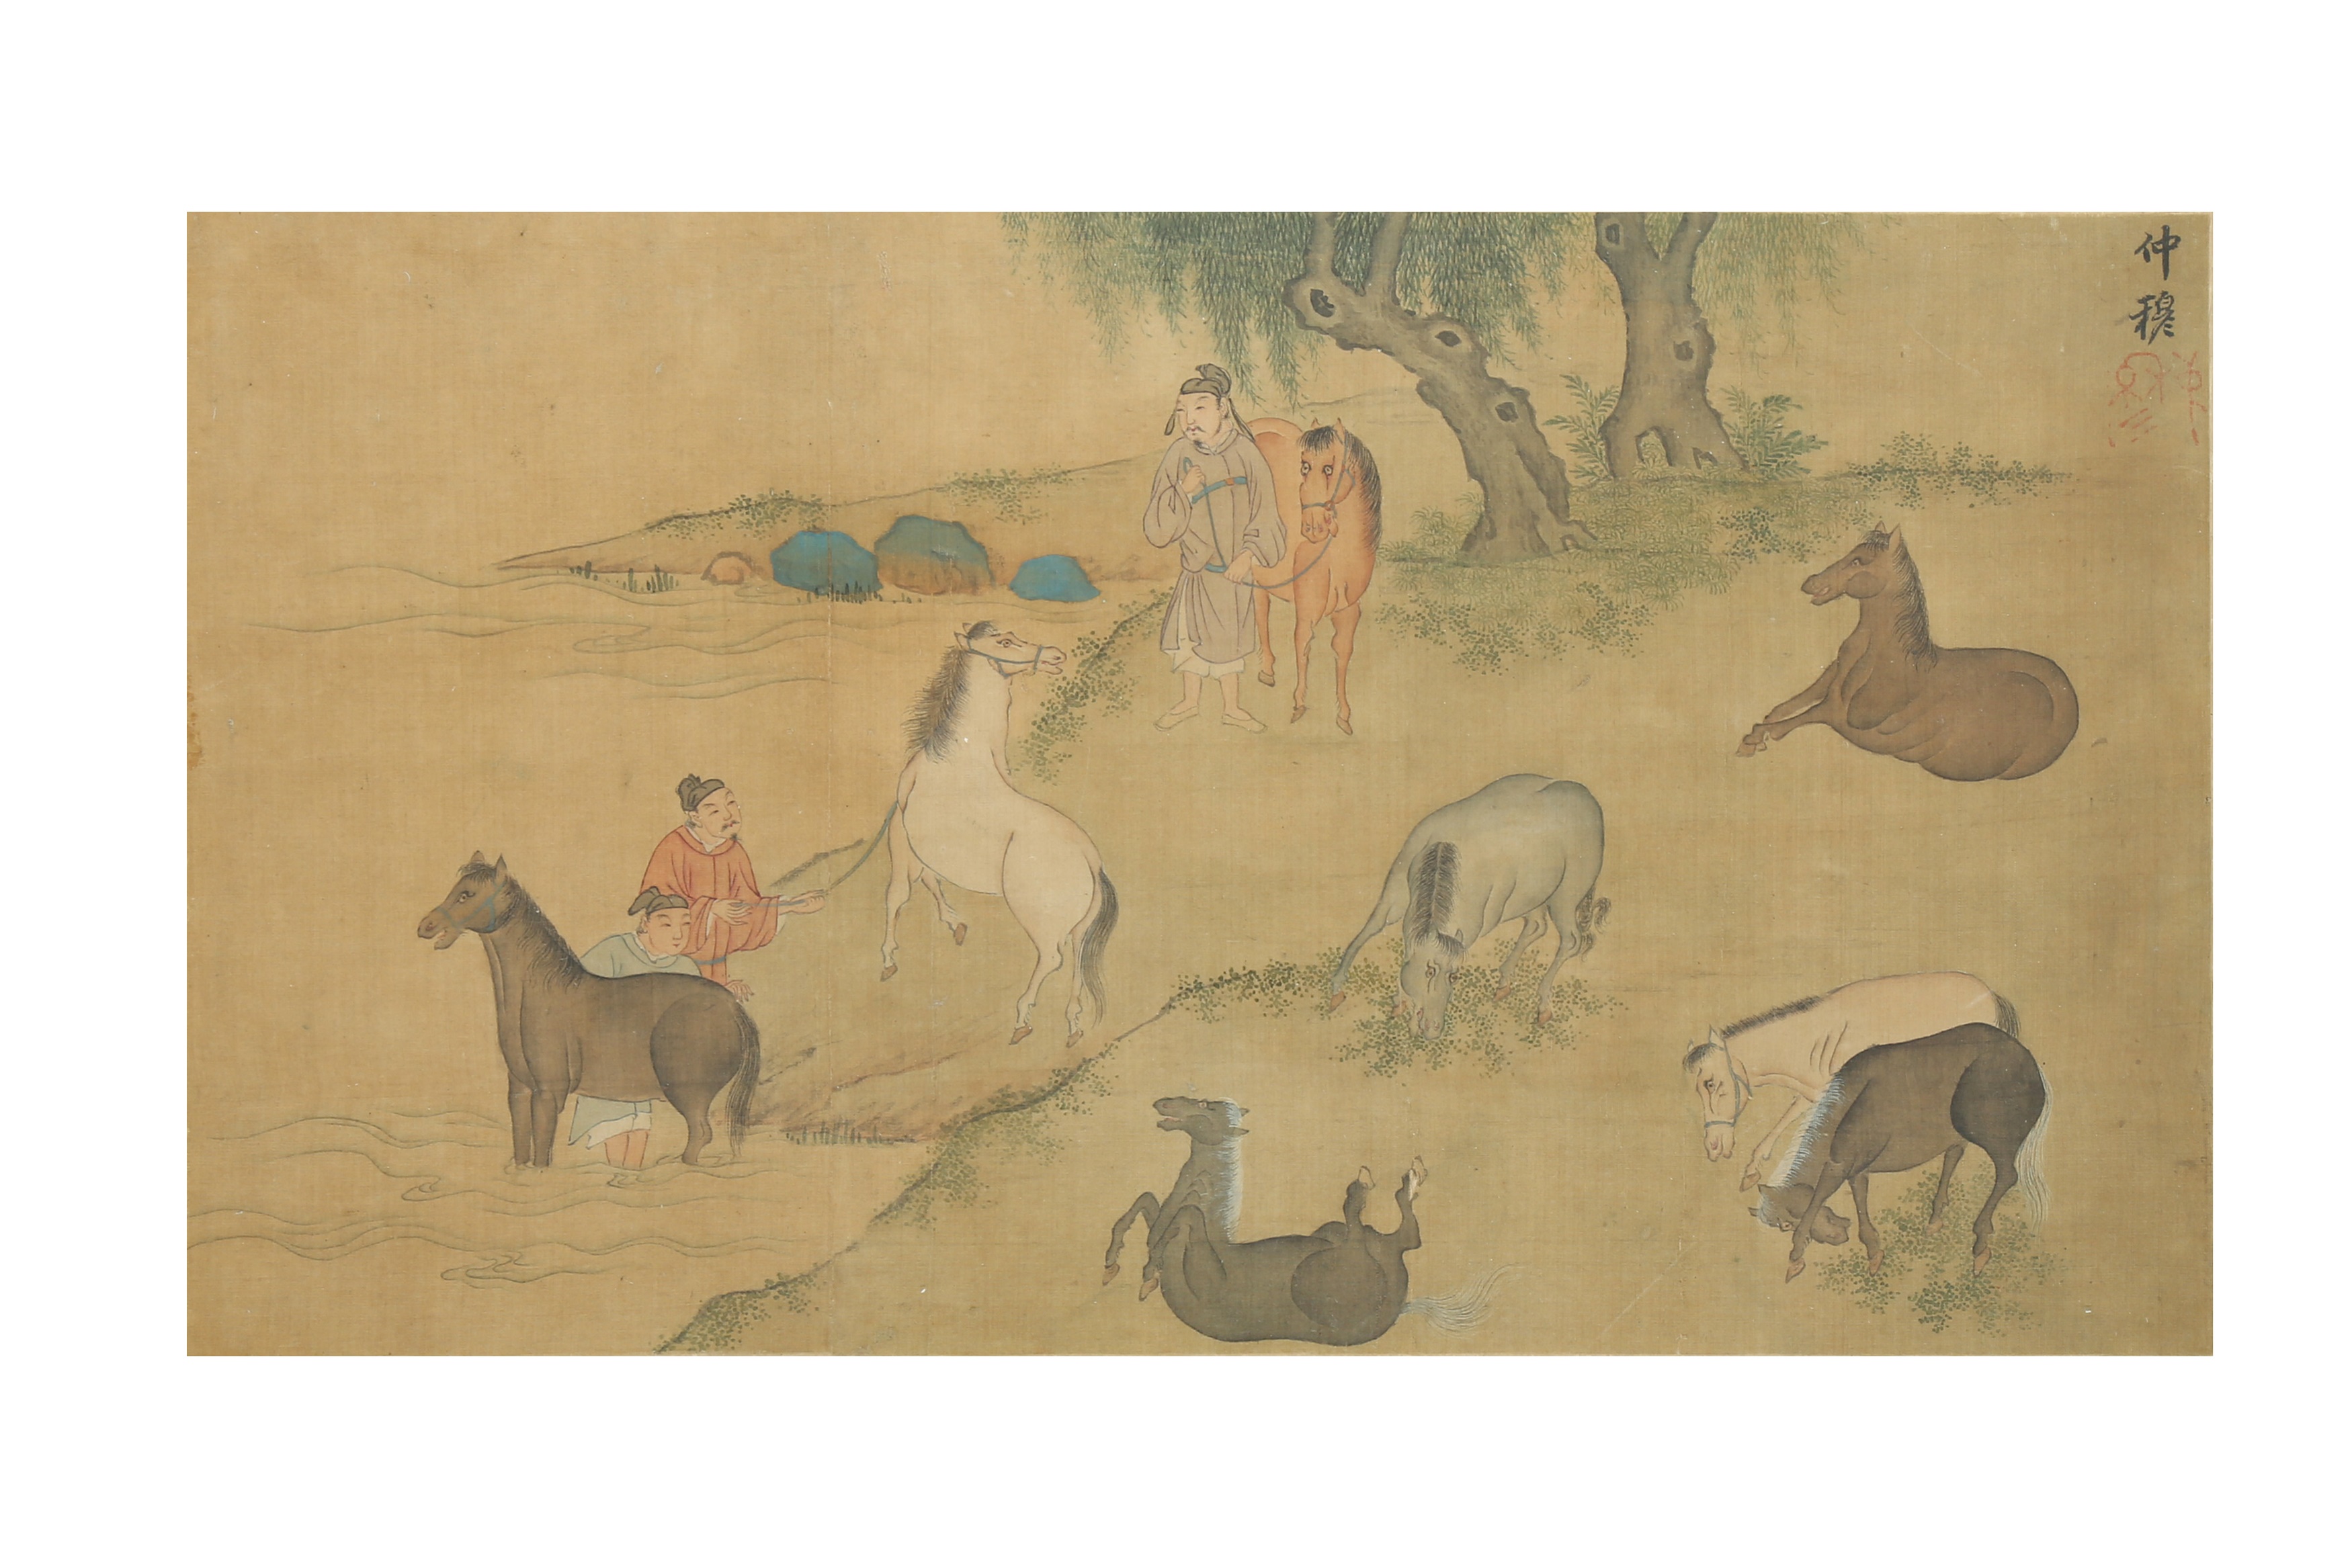 A CHINESE PAINTING OF THE 'EIGHT HORSES OF WANG MU'.